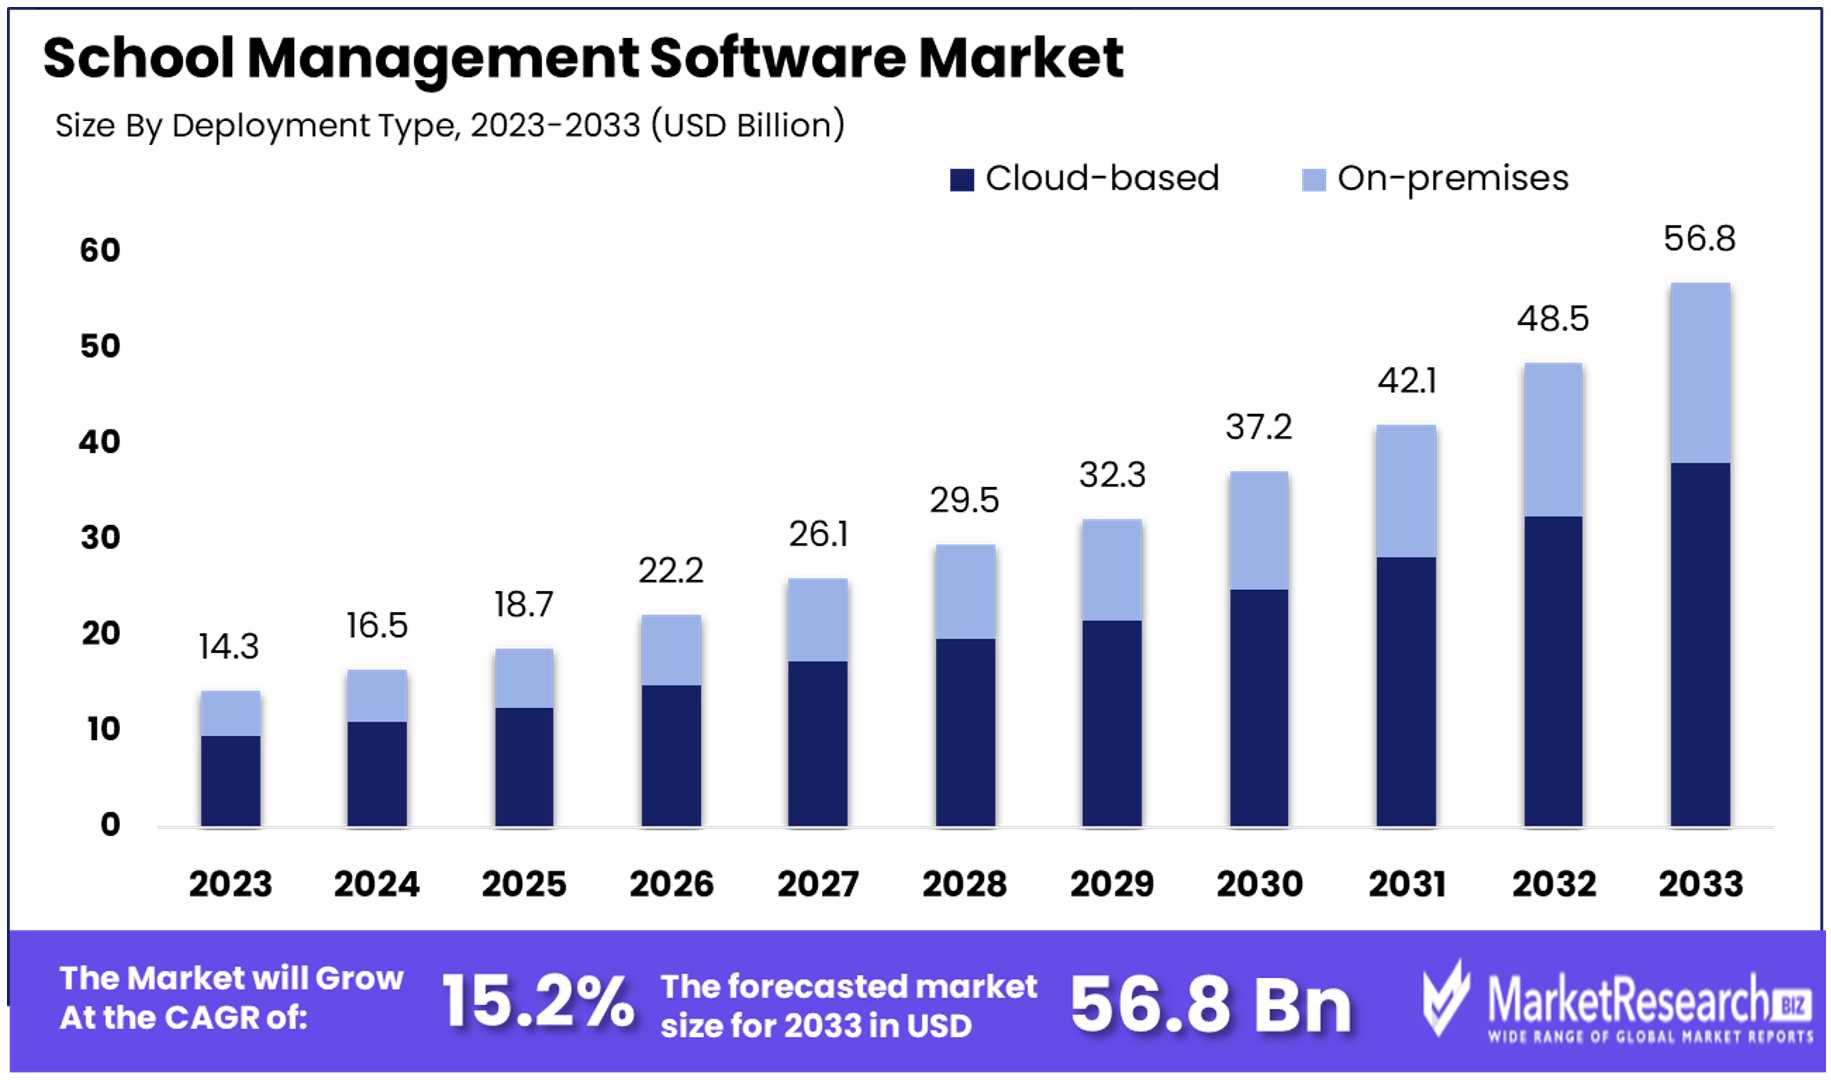 School Management Software Market By Size